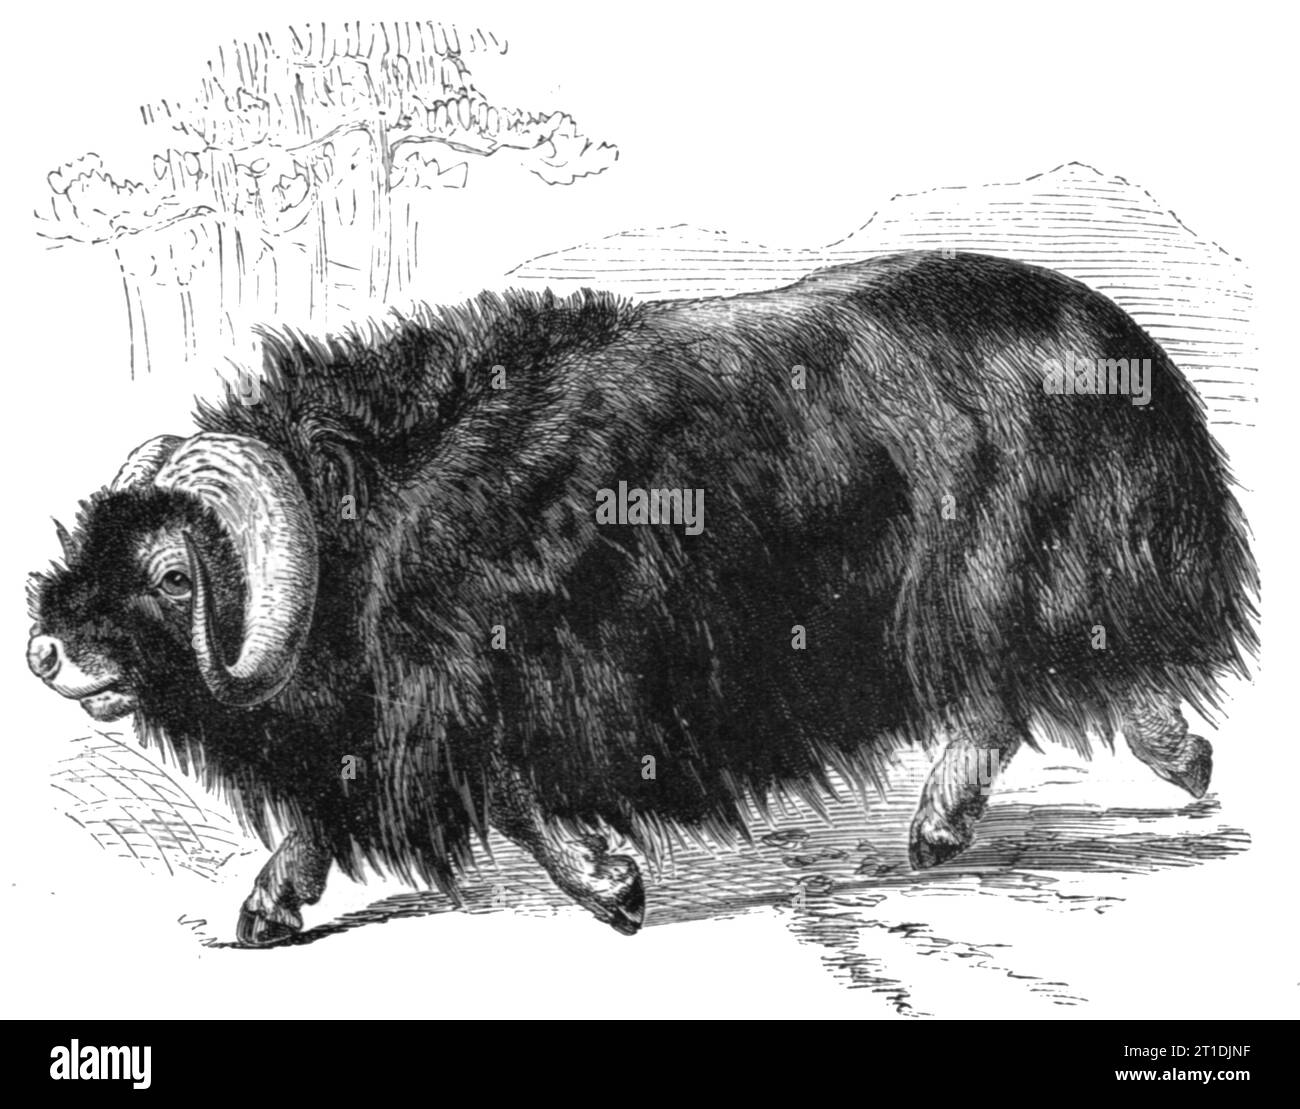 'Ovibos Moschatus; The Musk Ox and the Wolverine - a Geographical Parallel', 1875. From 'Illustrated Travels' by H.W. Bates. [Cassell, Petter, and Galpin, c1880, London] and Galpin. Stock Photo